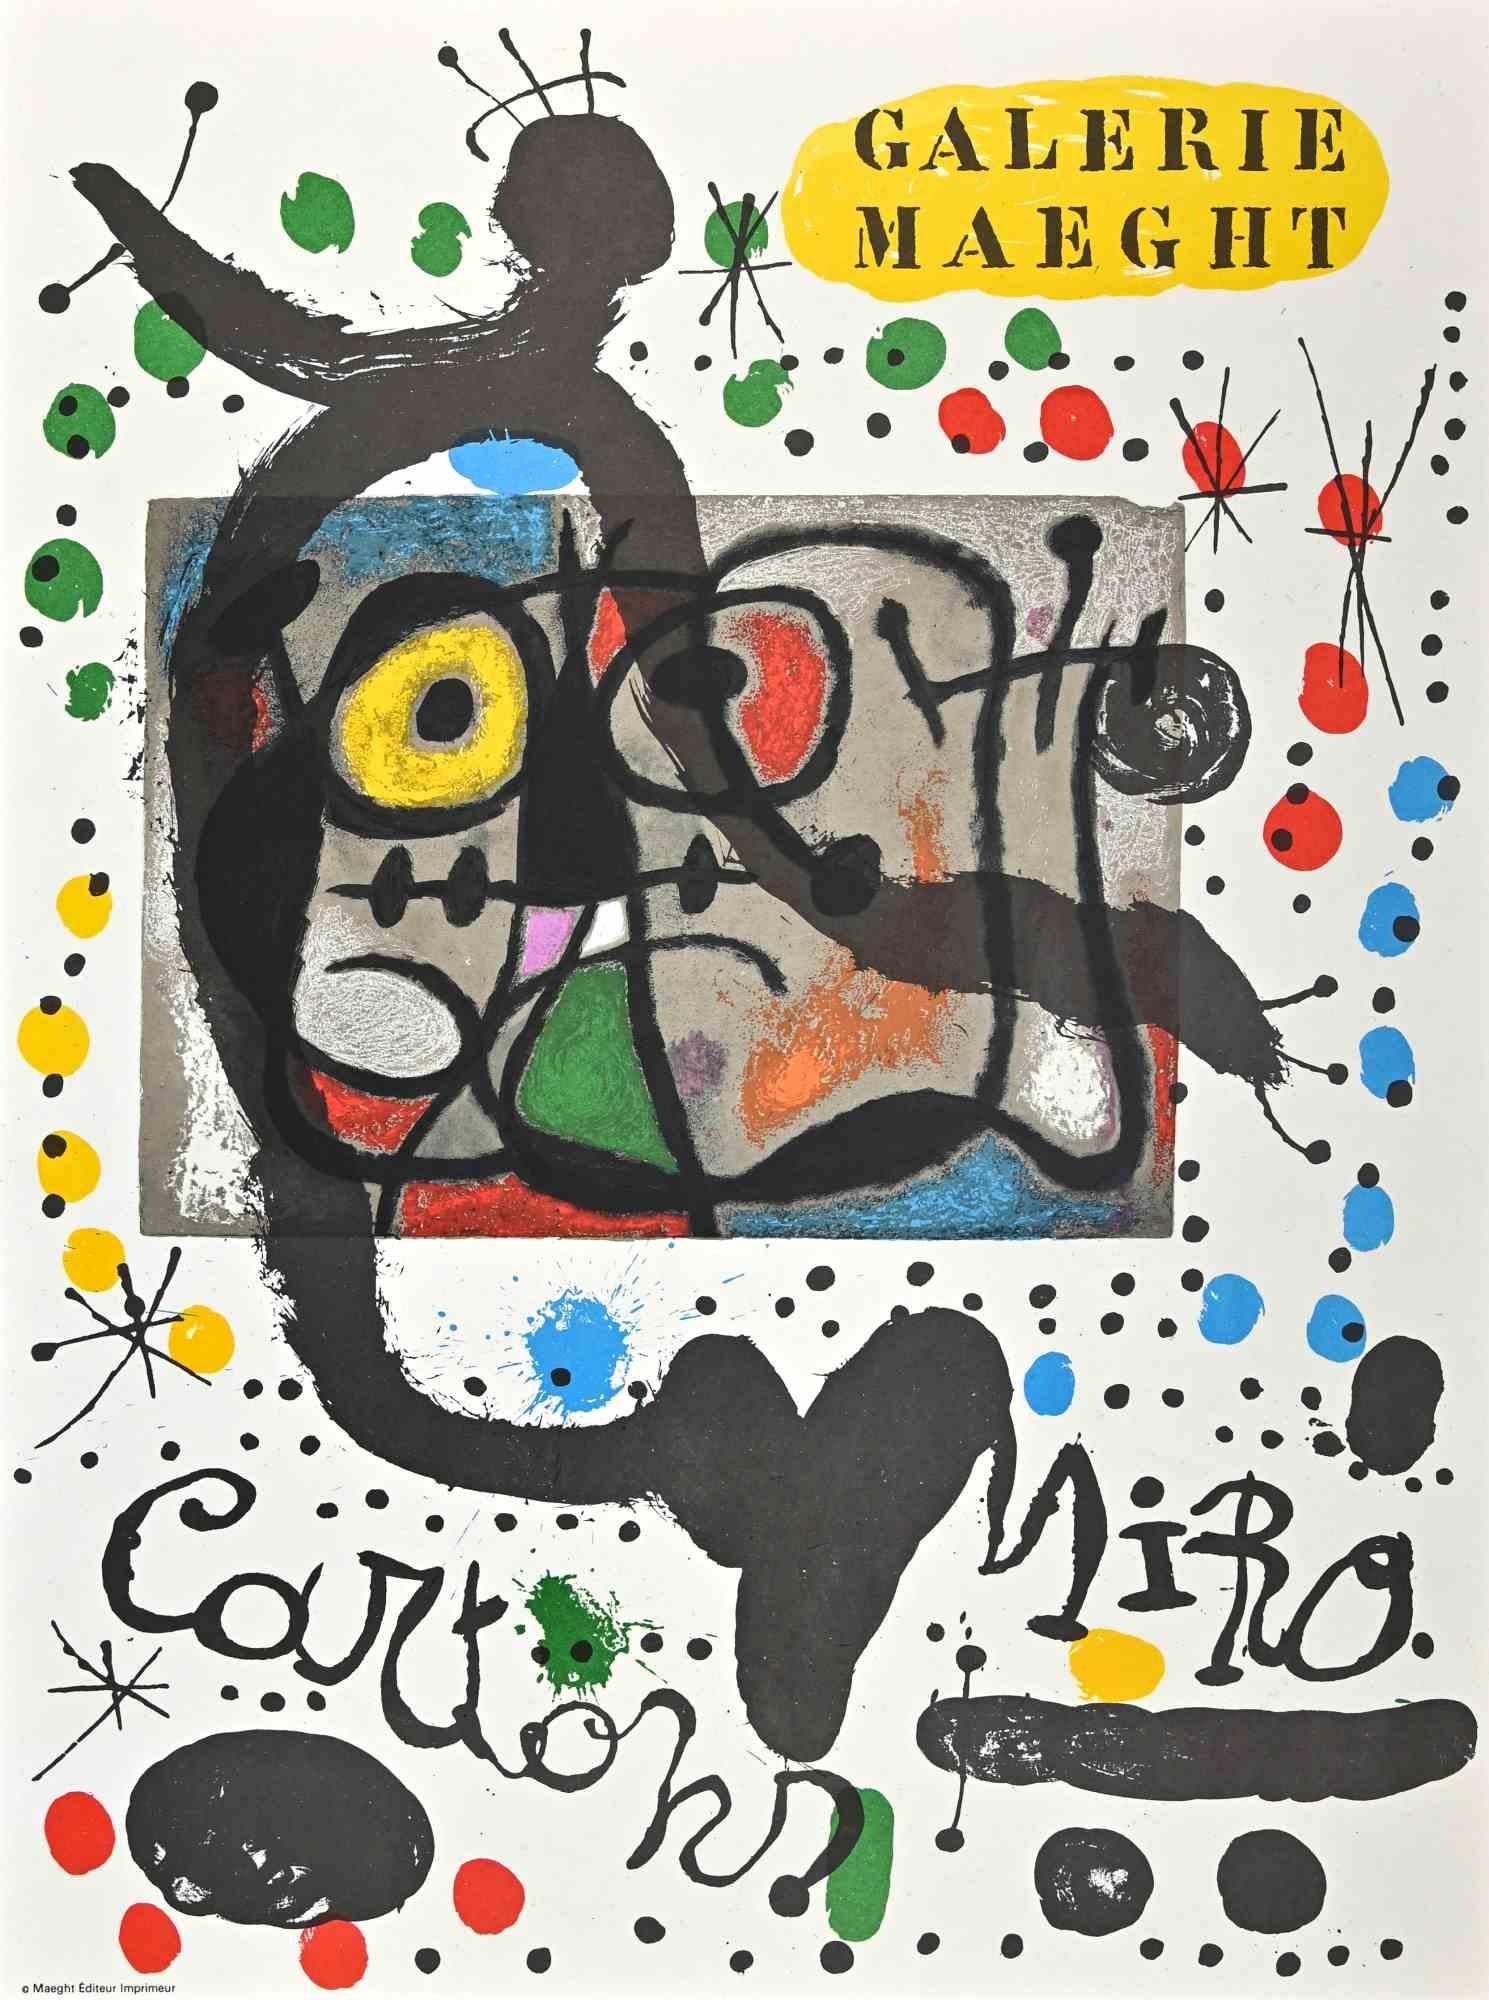 Vintage Poster - Exhibition at Galerie Maeght - 1978